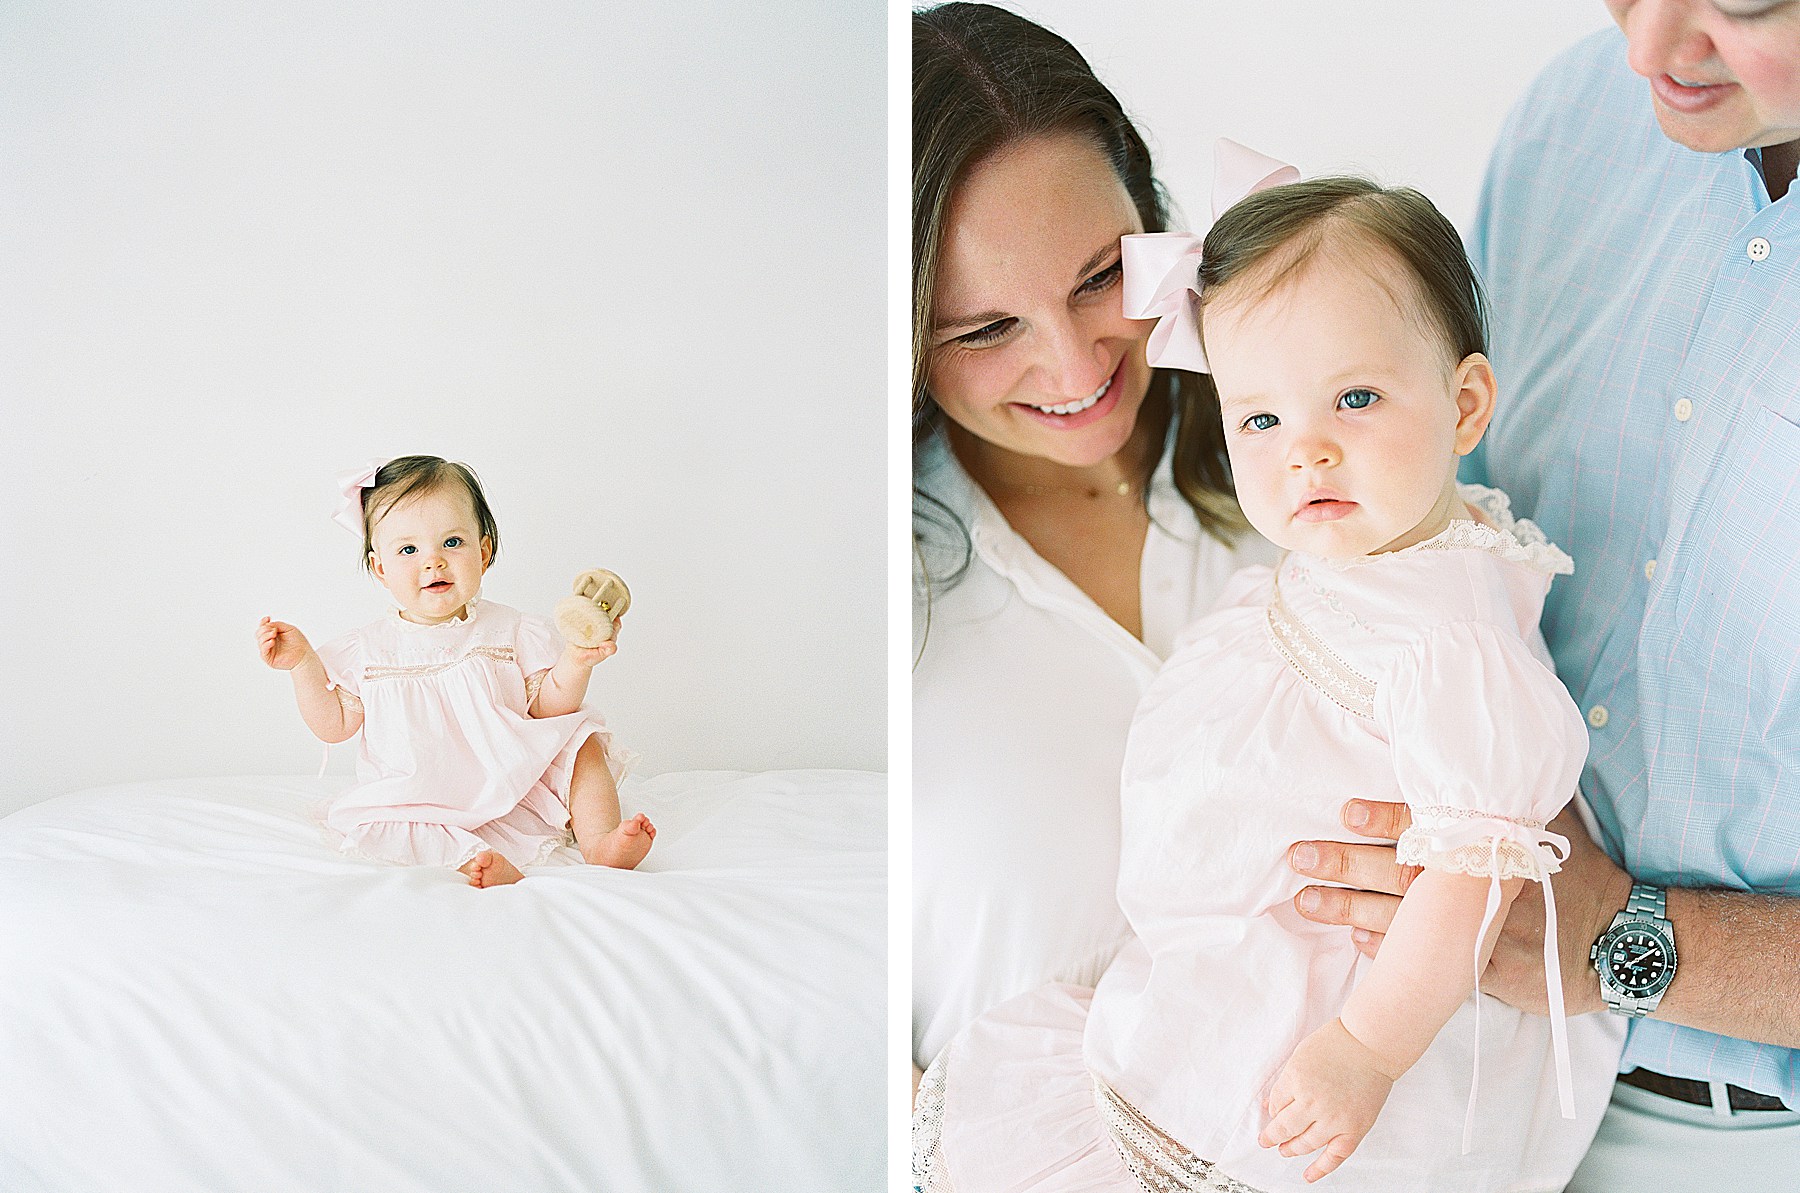 Little Rock film family photographer | one year old playing with toys being snuggled by mom and dad